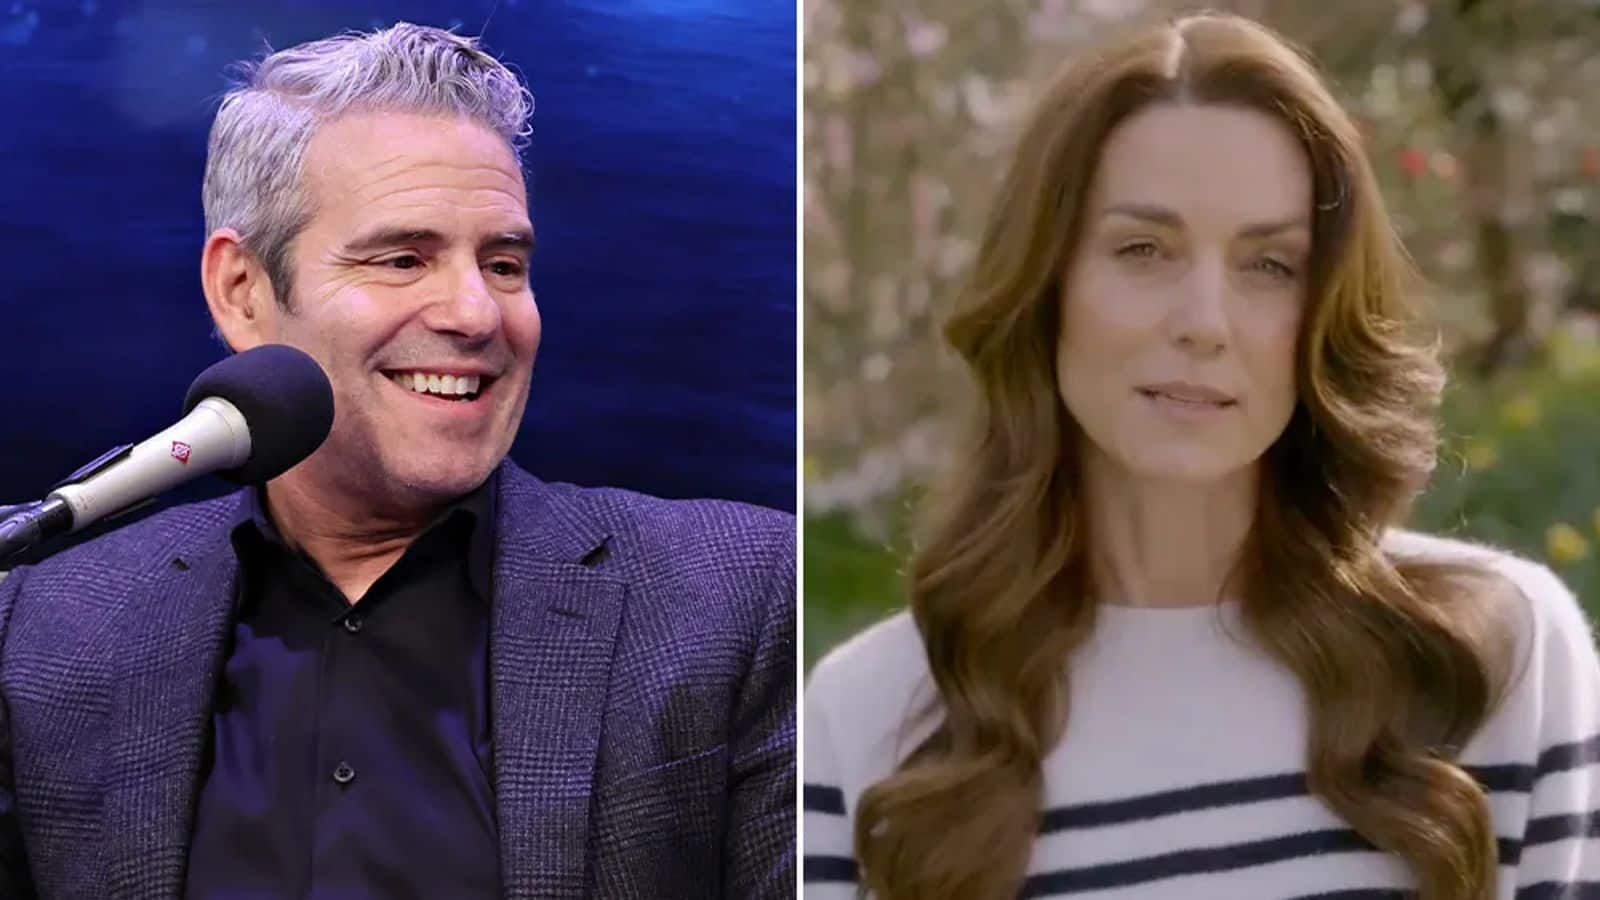 Andy Cohen regrets spreading rumors about Kate Middleton; issues apology